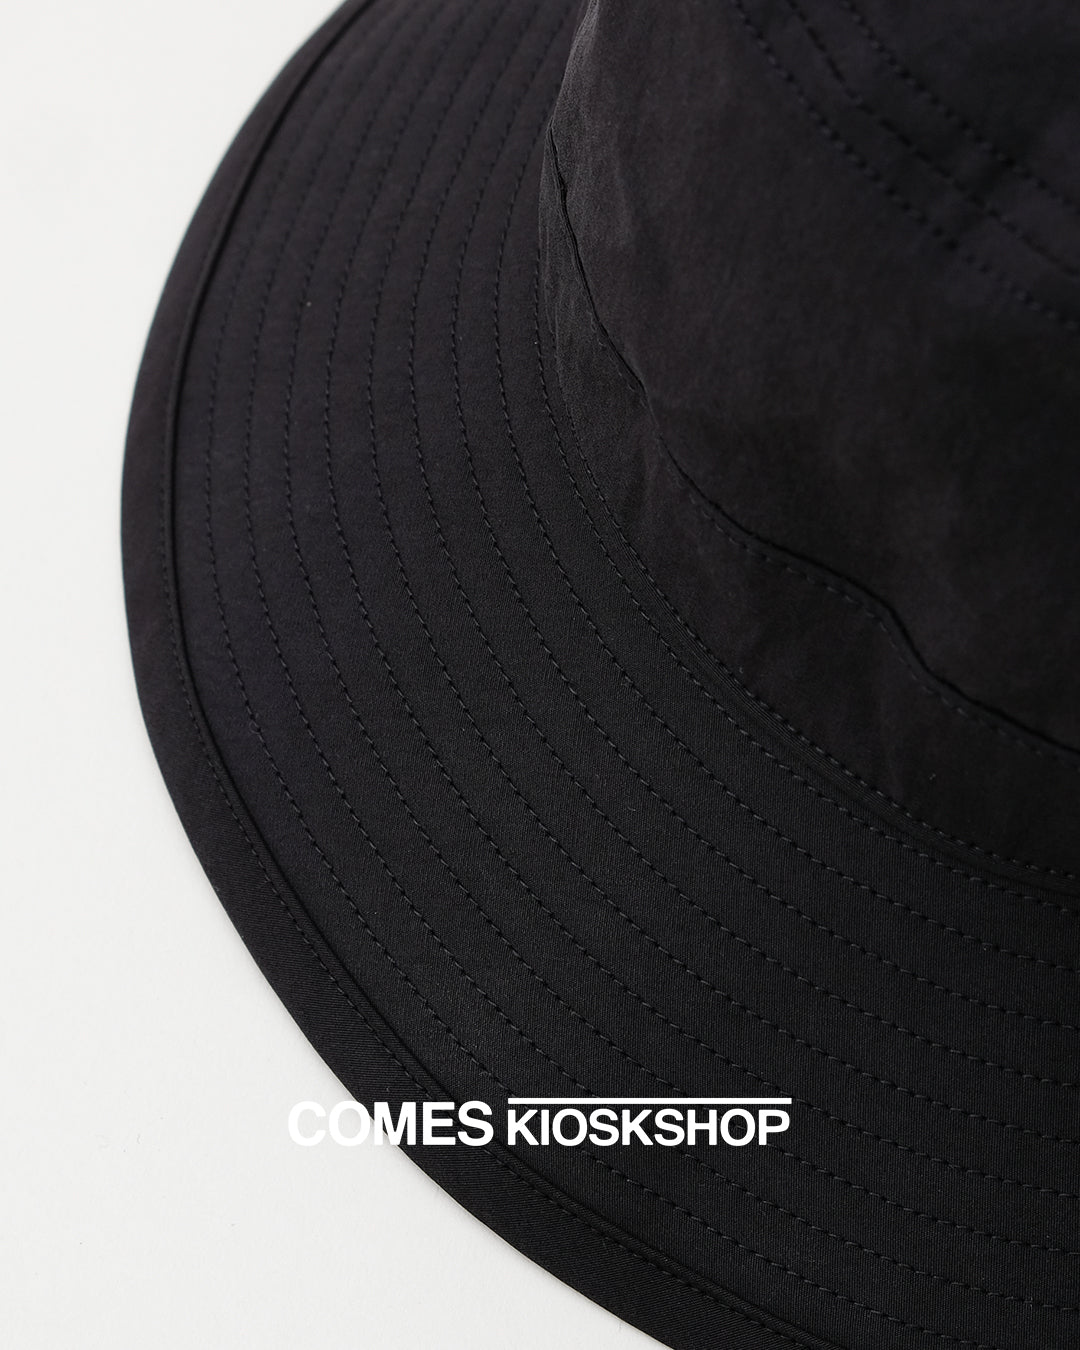 HIGHT COUNT RUBBER CLOTH BUCKET HAT